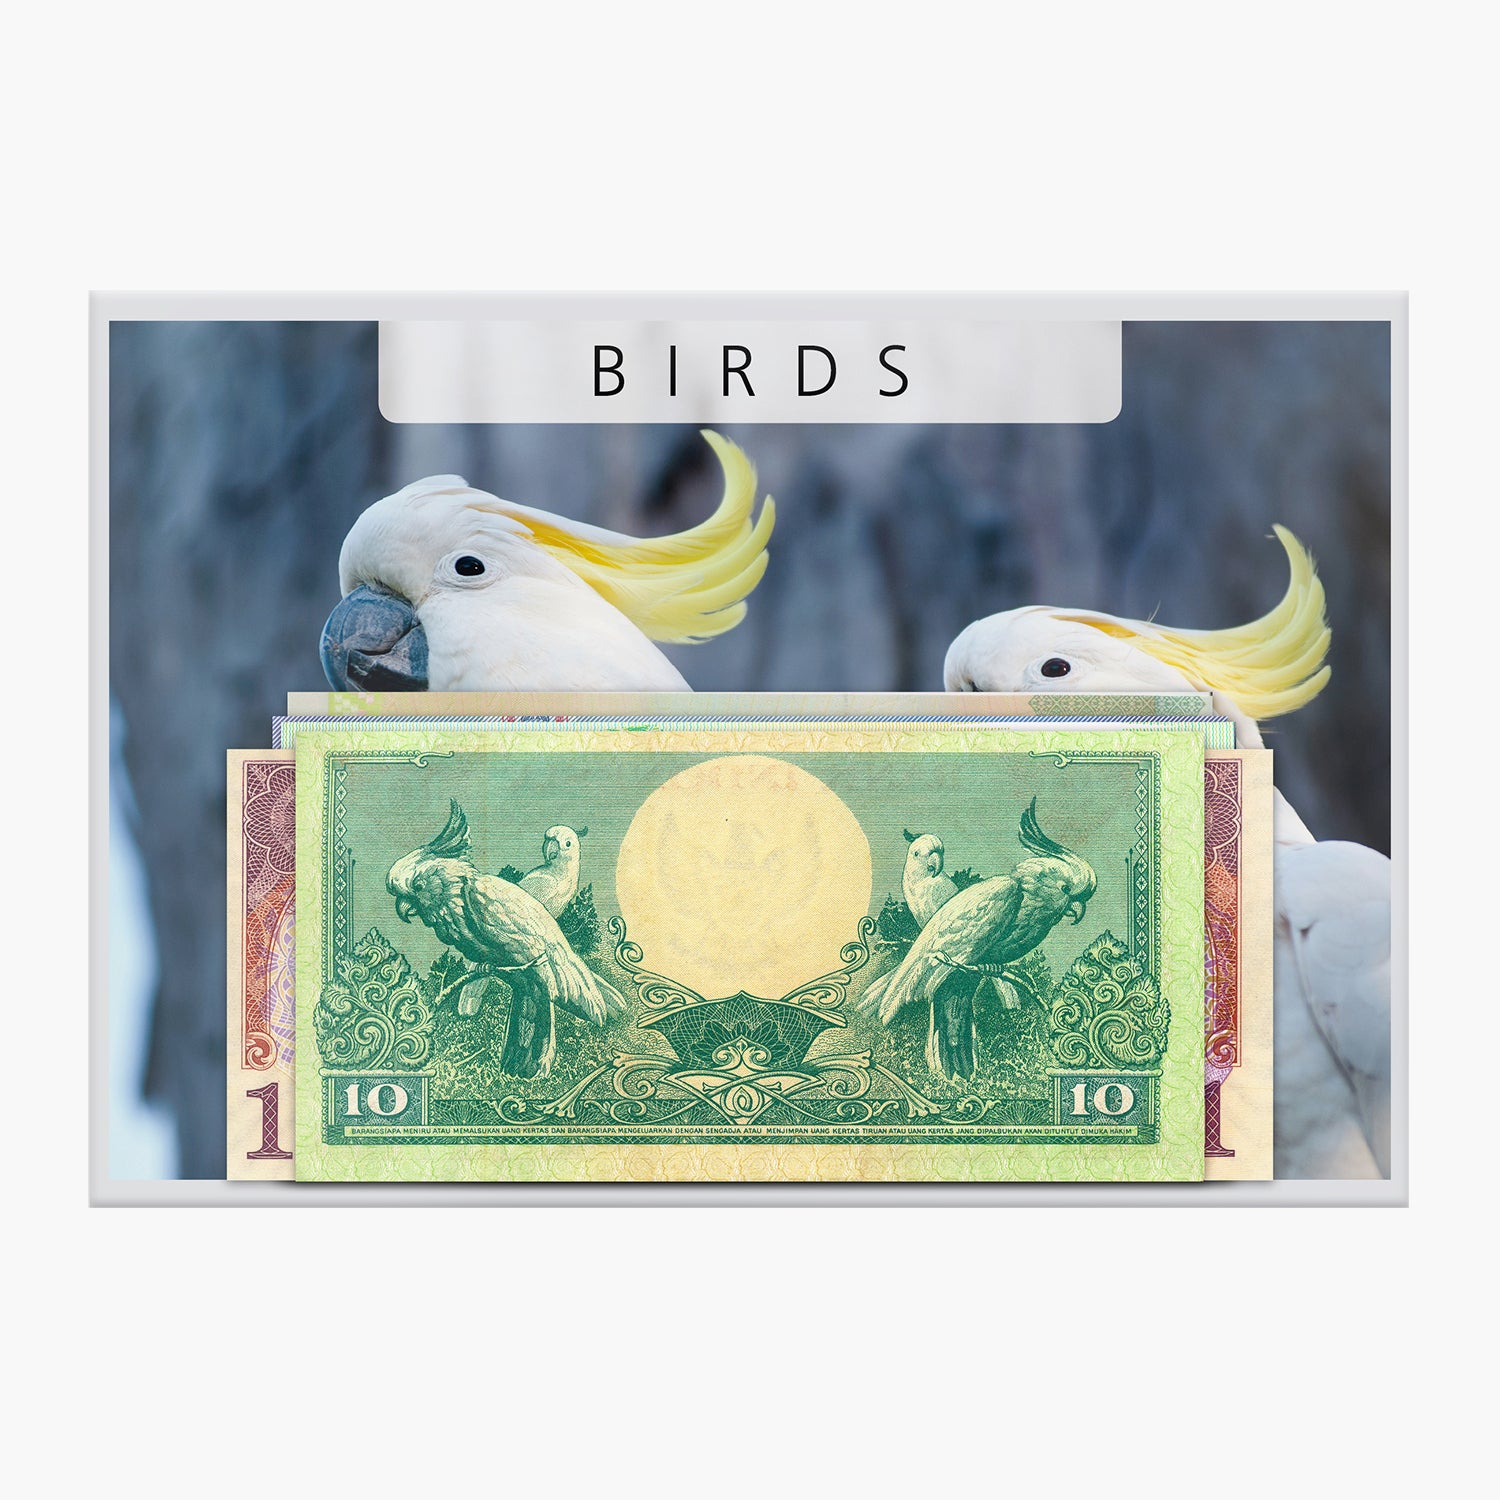 Banknote Collection "Birds II"